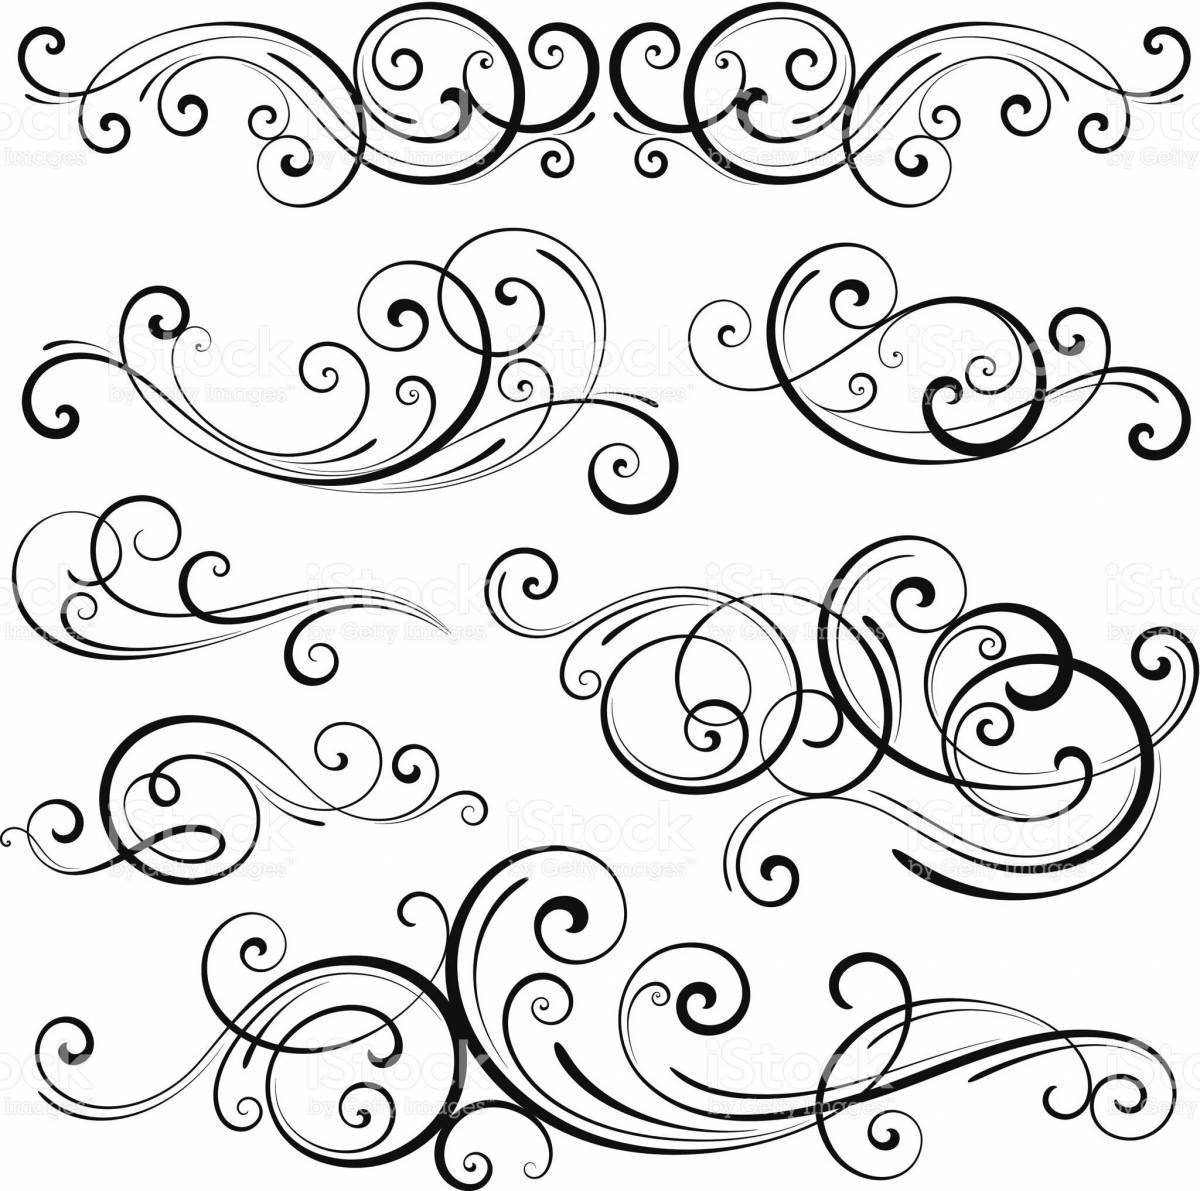 Exciting monogram coloring page